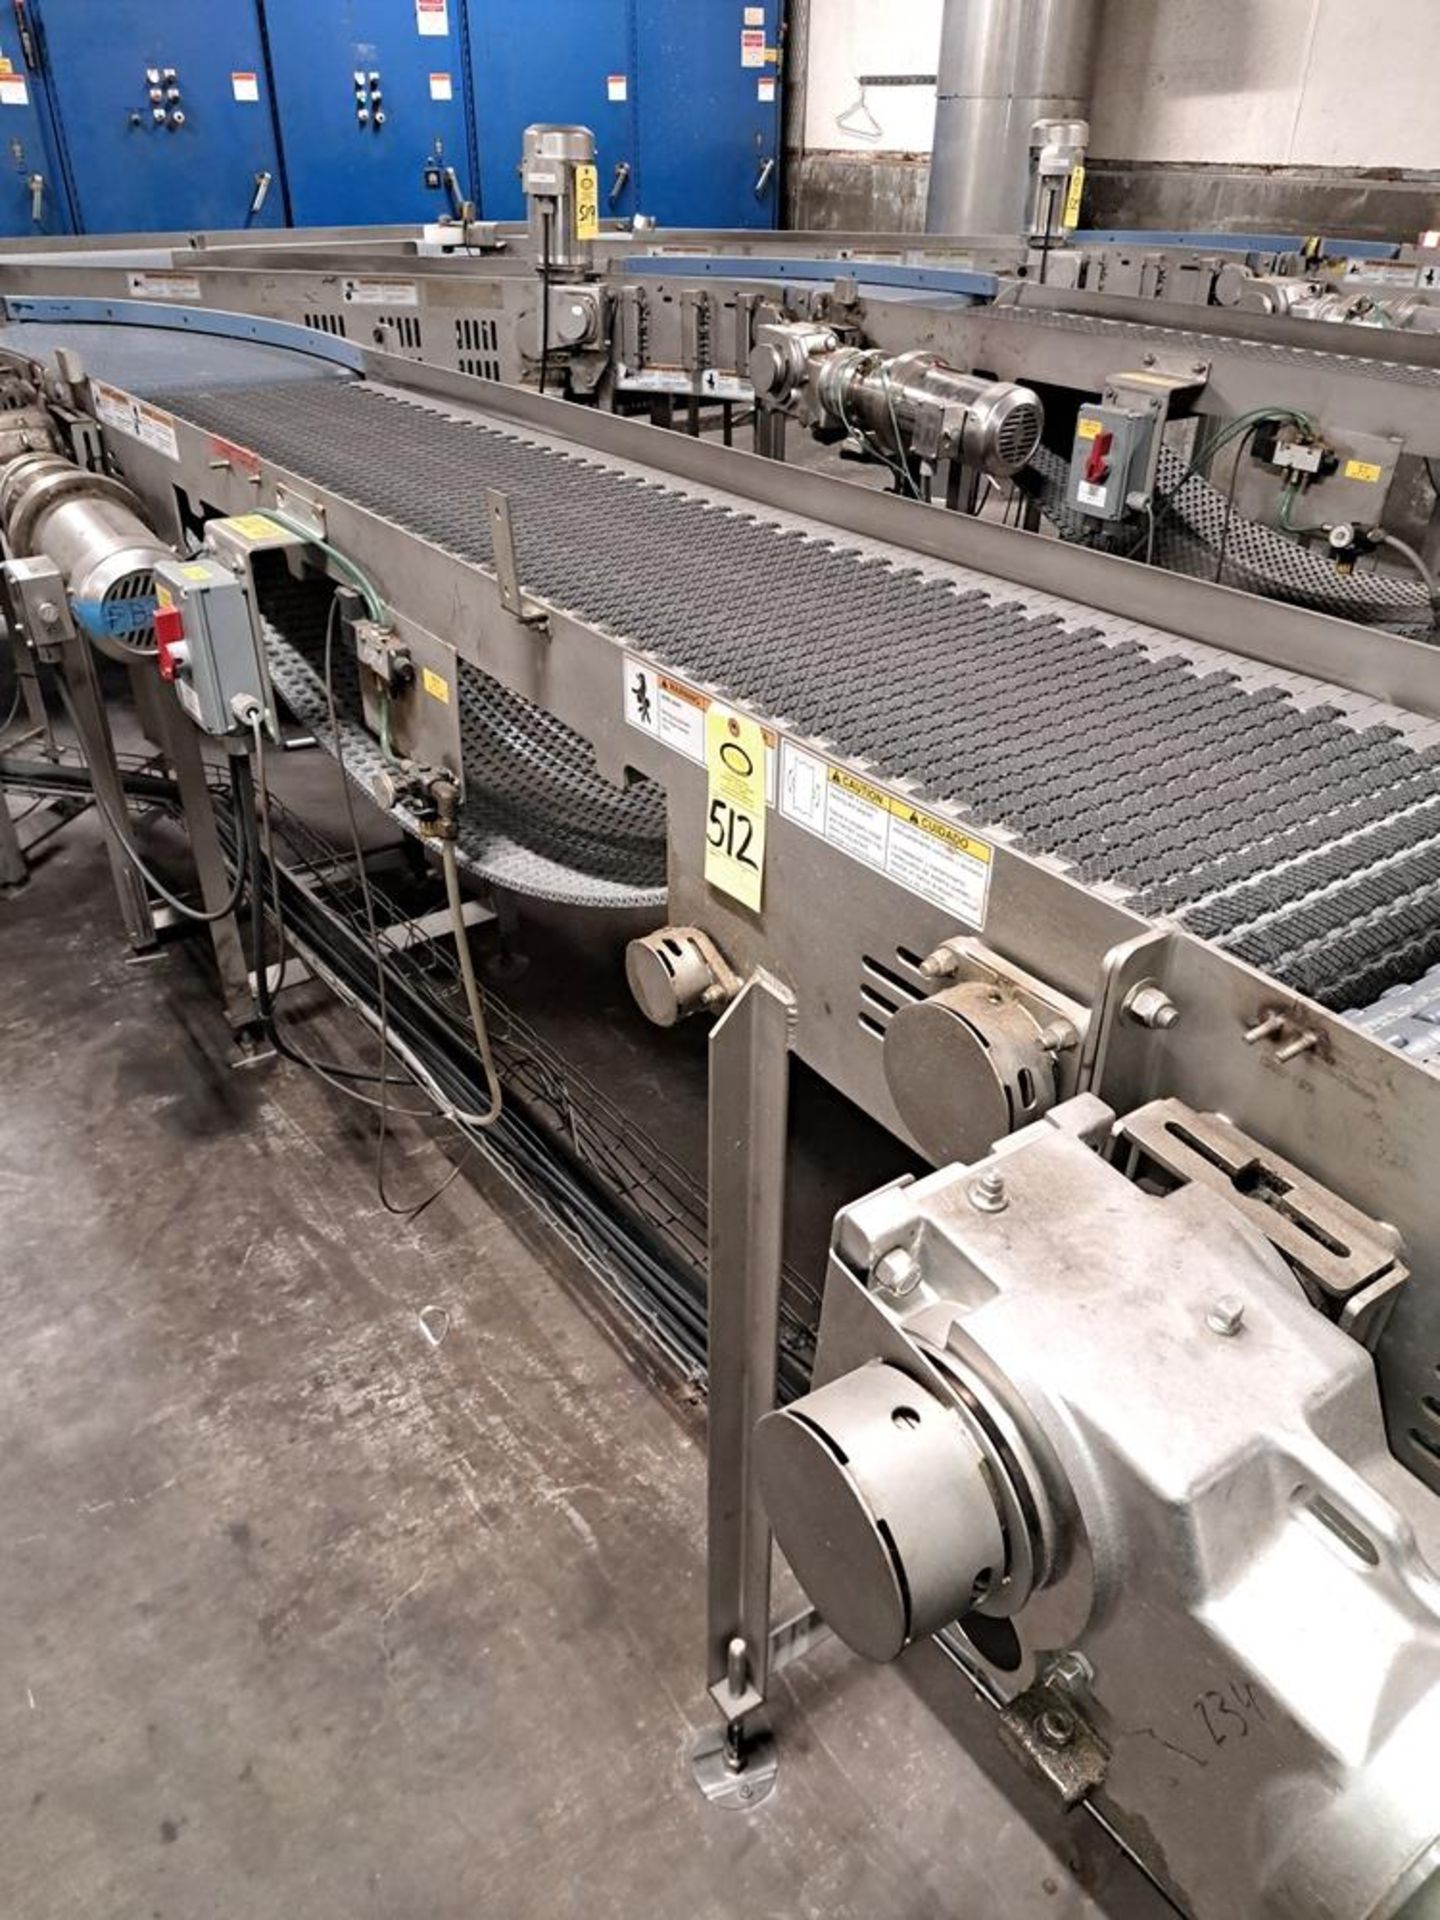 Stainless Steel Frame Conveyor, 20" W X 8' L, plastic belt, stainless steel motor, 230/460 volts: